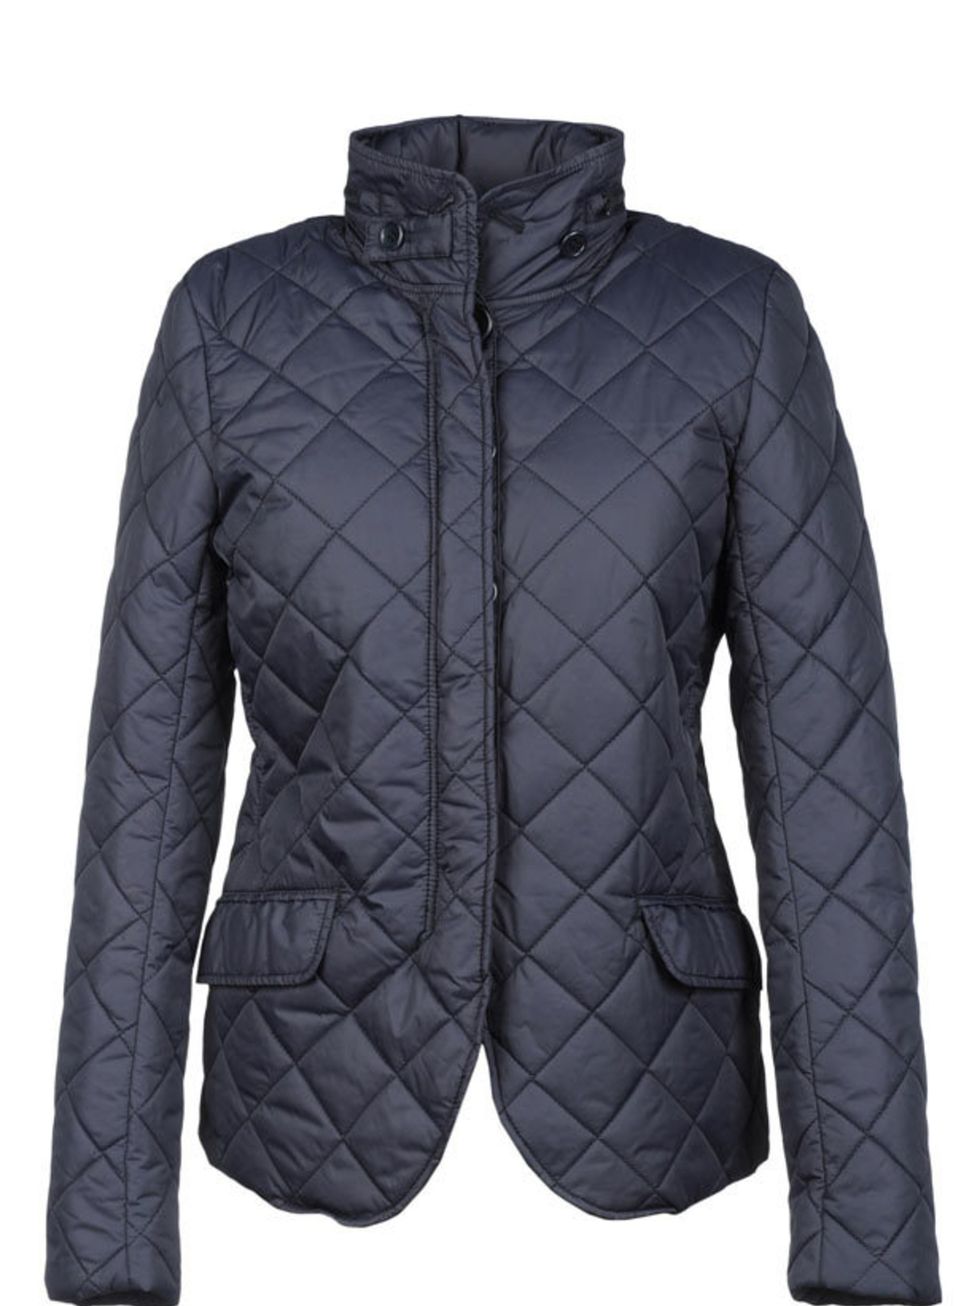 <p>Aspesi quilted jacket, £255, at <a href="http://www.thecorner.com/searchresult.asp/tskay/582B0E9B/dept/tcwoman/type/1/textsearch/ASPESI/toll/P/ipp/30/gender/D">thecorner.com</a></p>